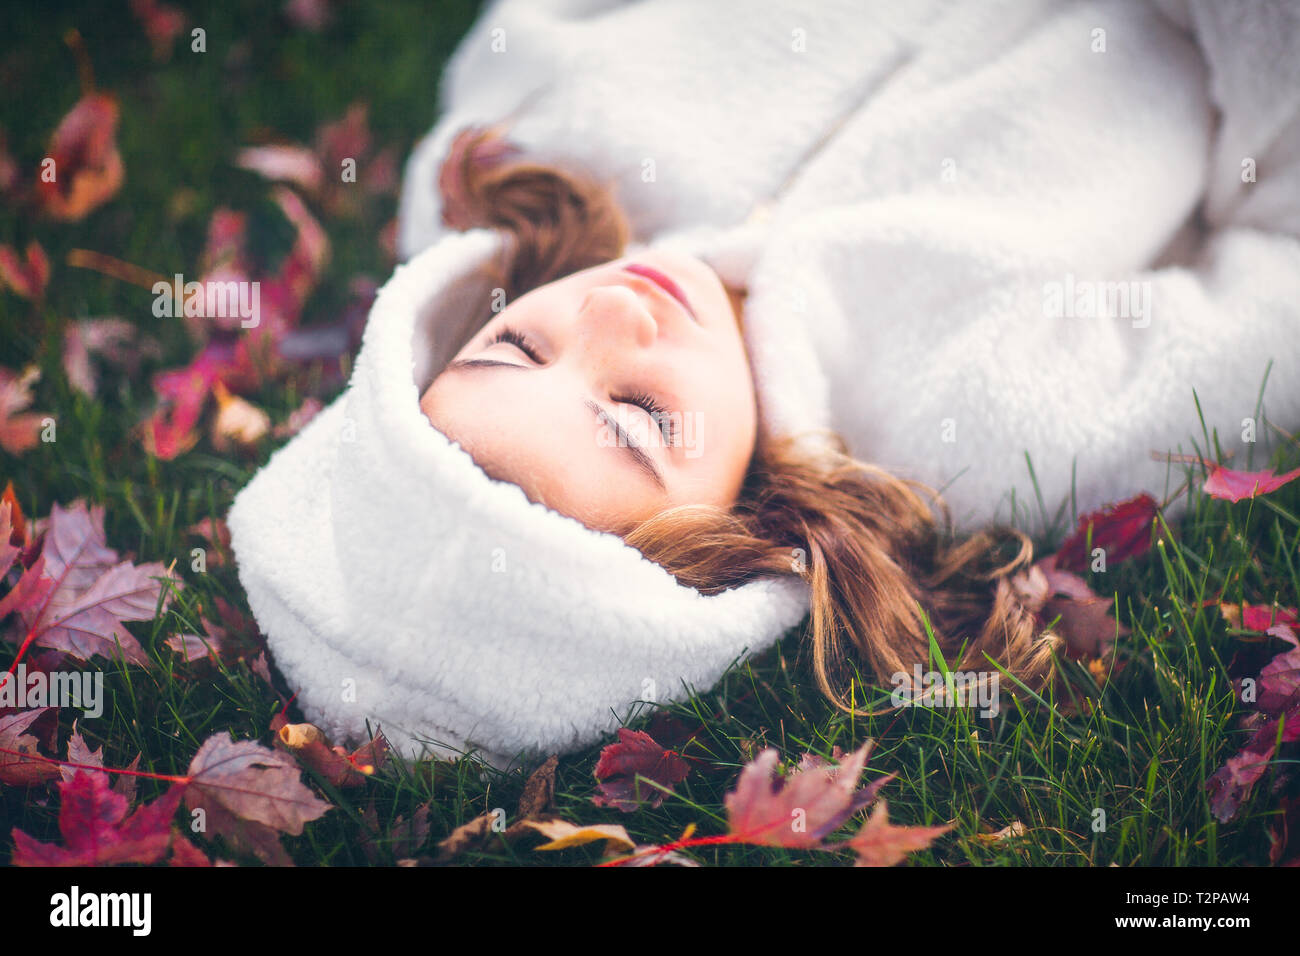 Girl in white hooded top with eyes closed, lying on grass amongst autumn leaves, portrait Stock Photo